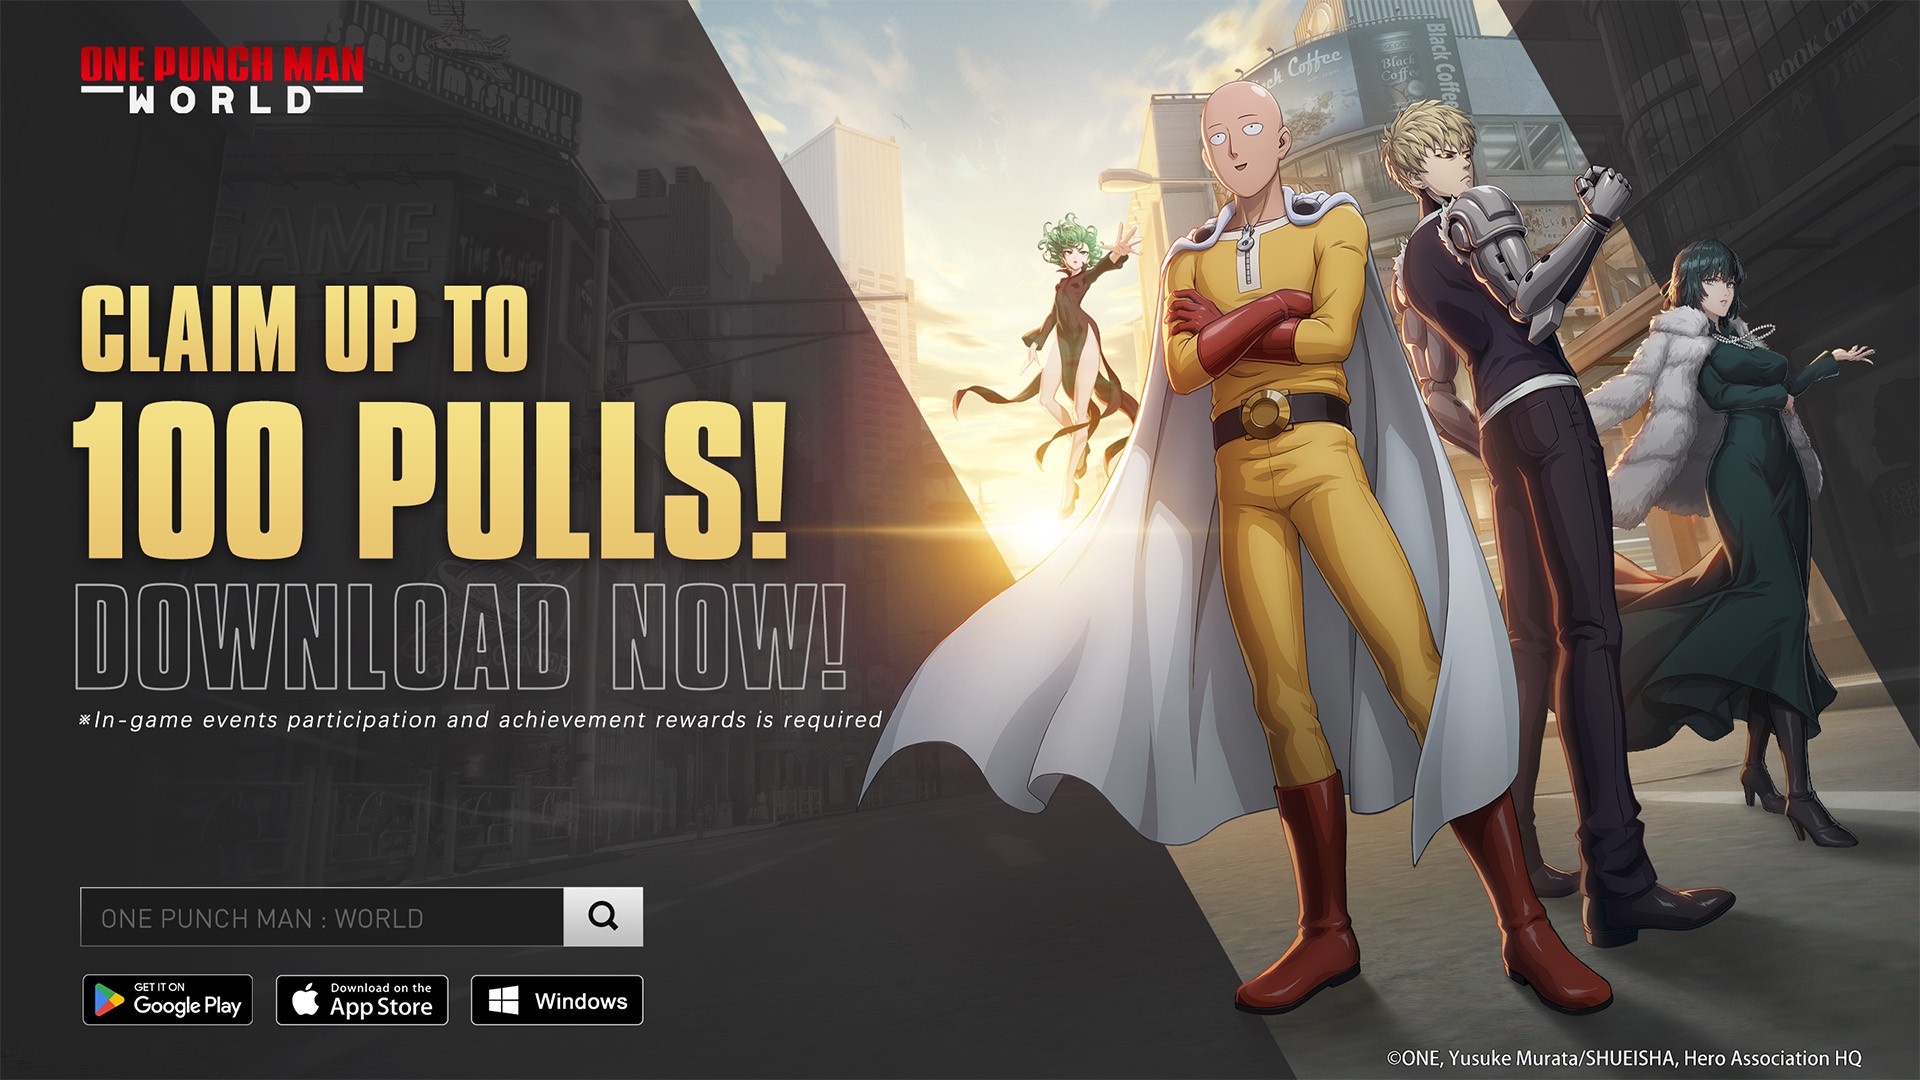 One Punch Man: World - Now live! Start an Exciting New Adventure with Thrilling New Gameplay!